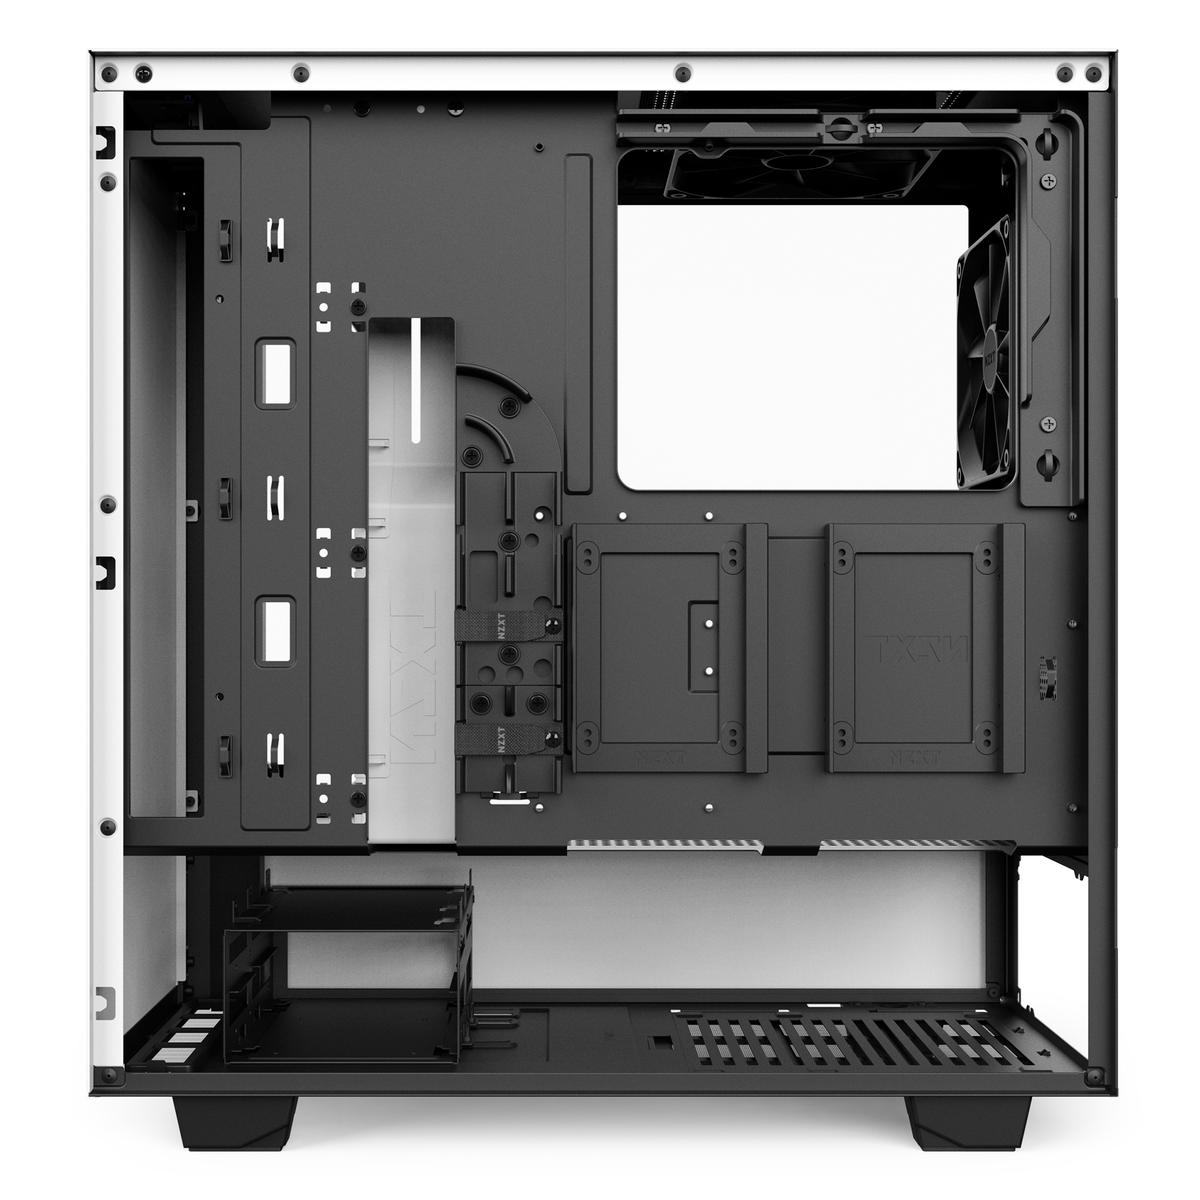 NZXT H500 Mid Tower ATX Mid Tower (Branco)